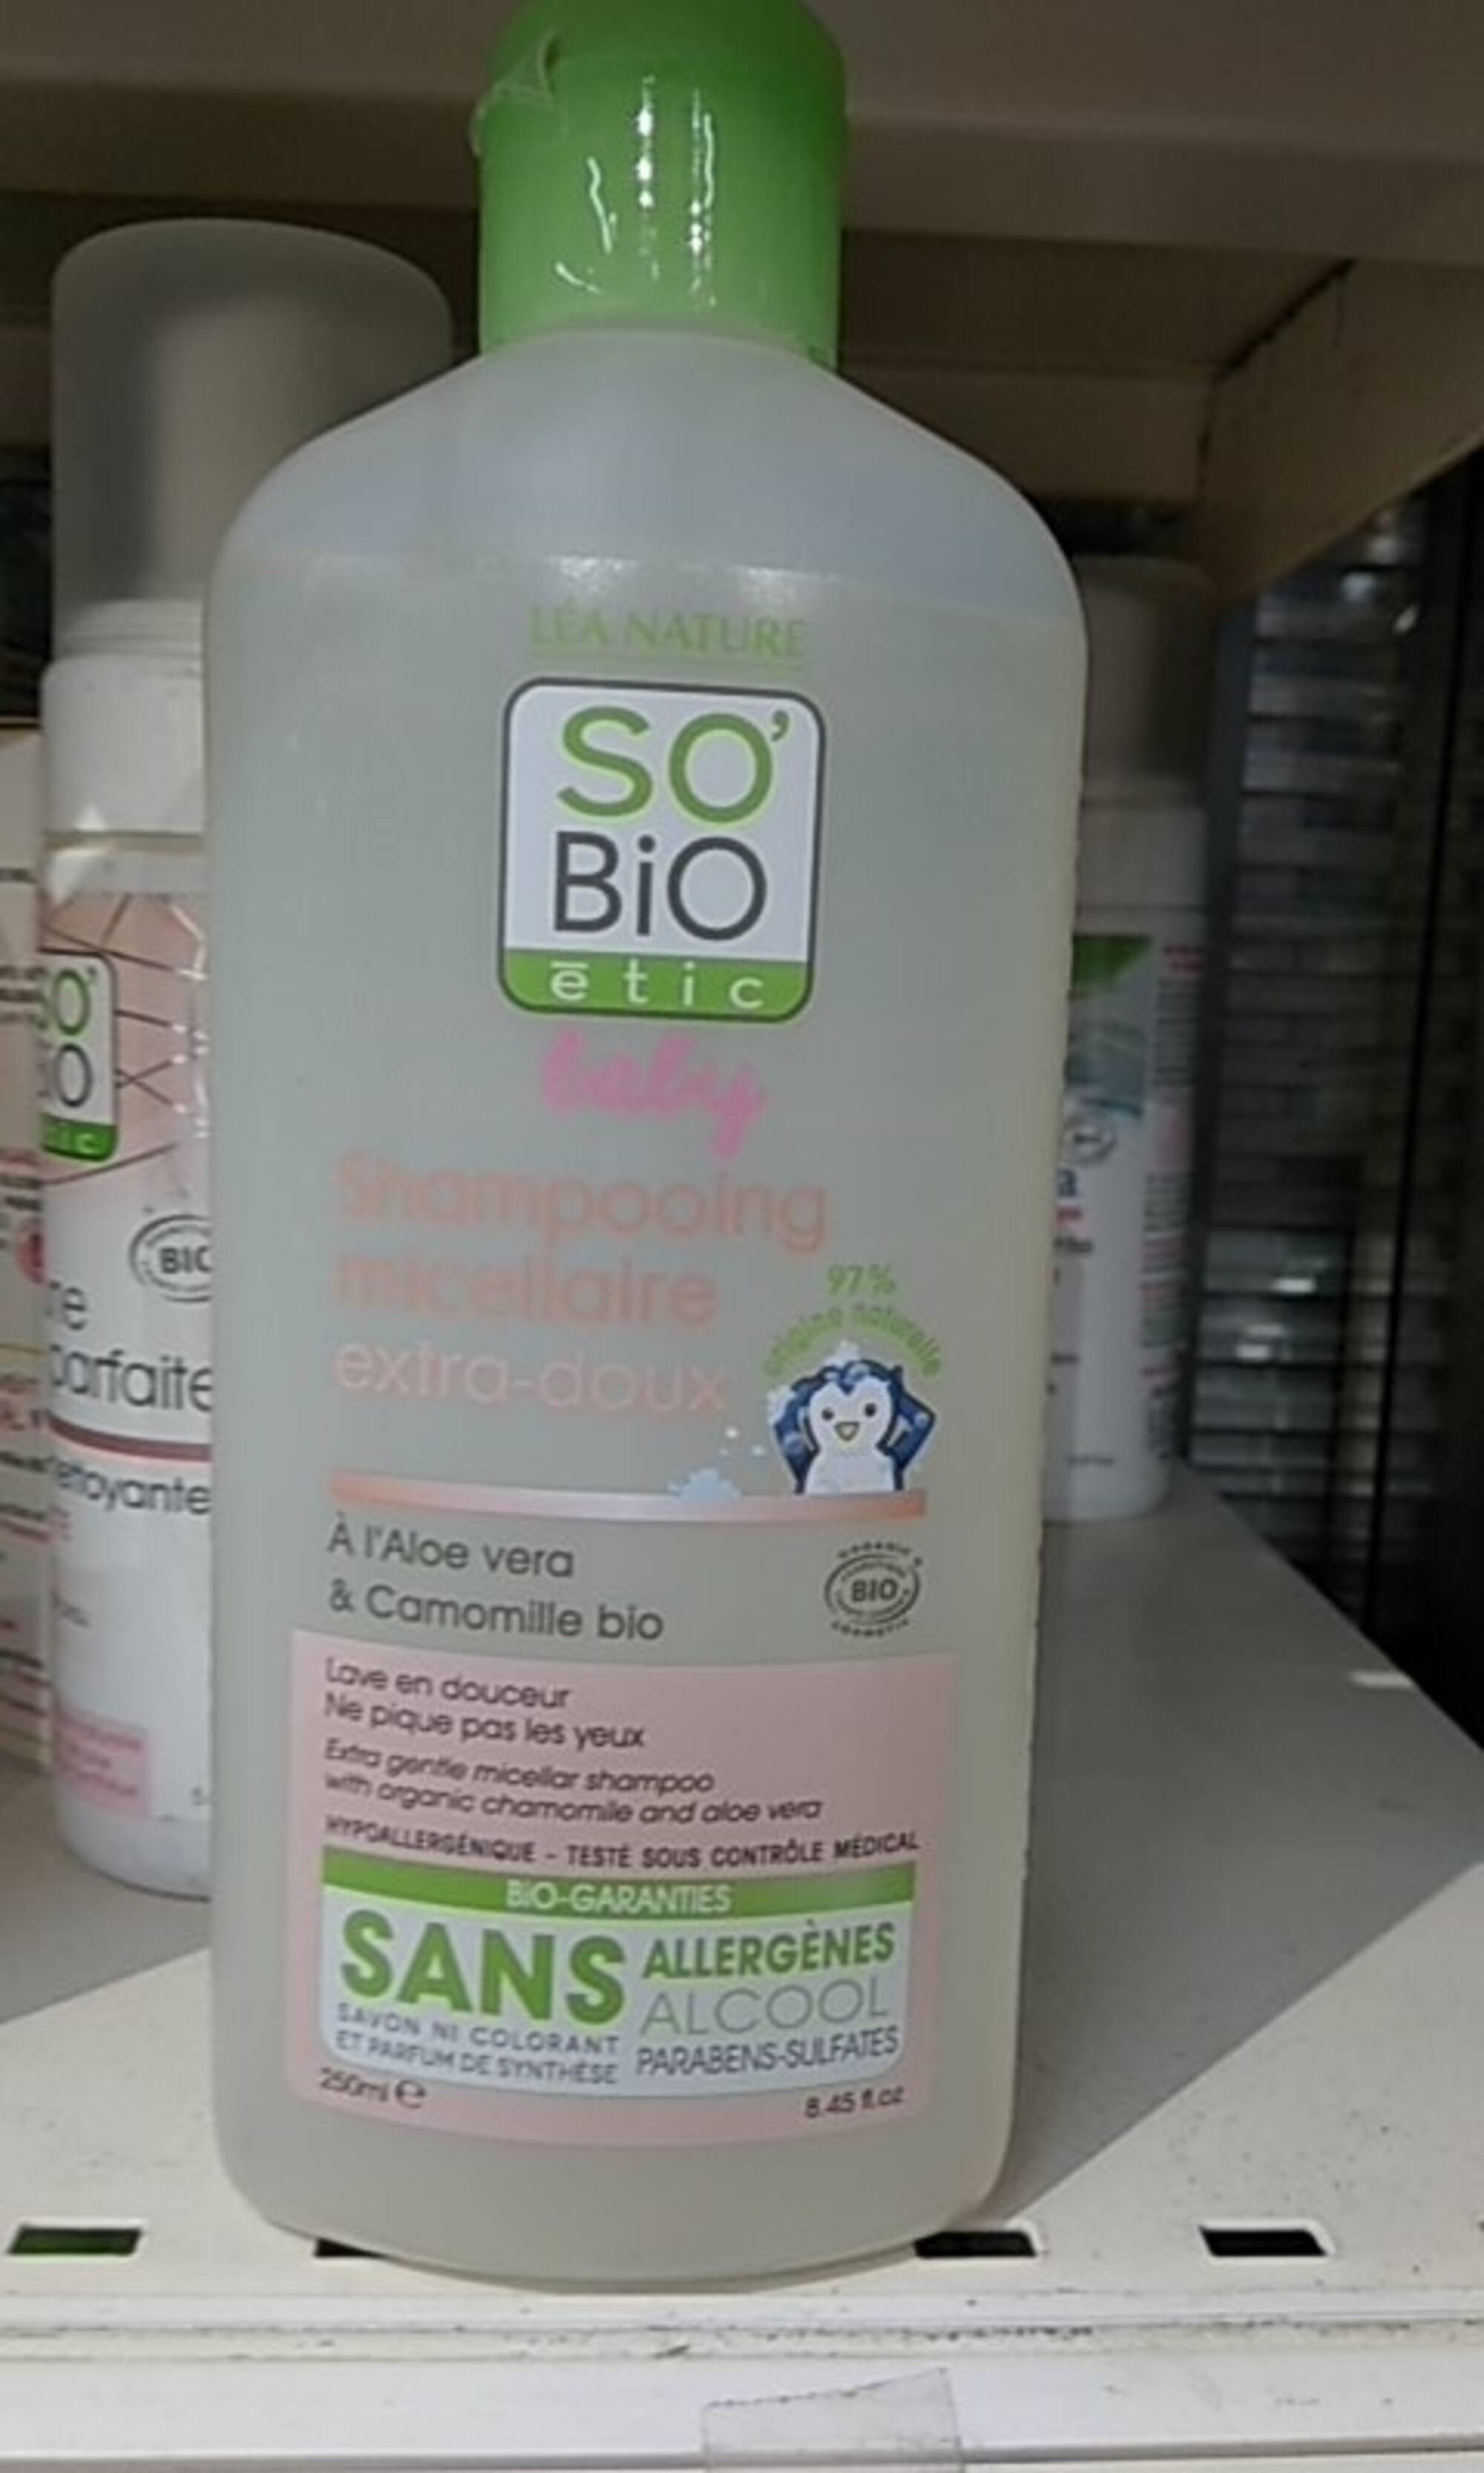 LÉA NATURE - So' Bio étic - Shampooing micellaire baby